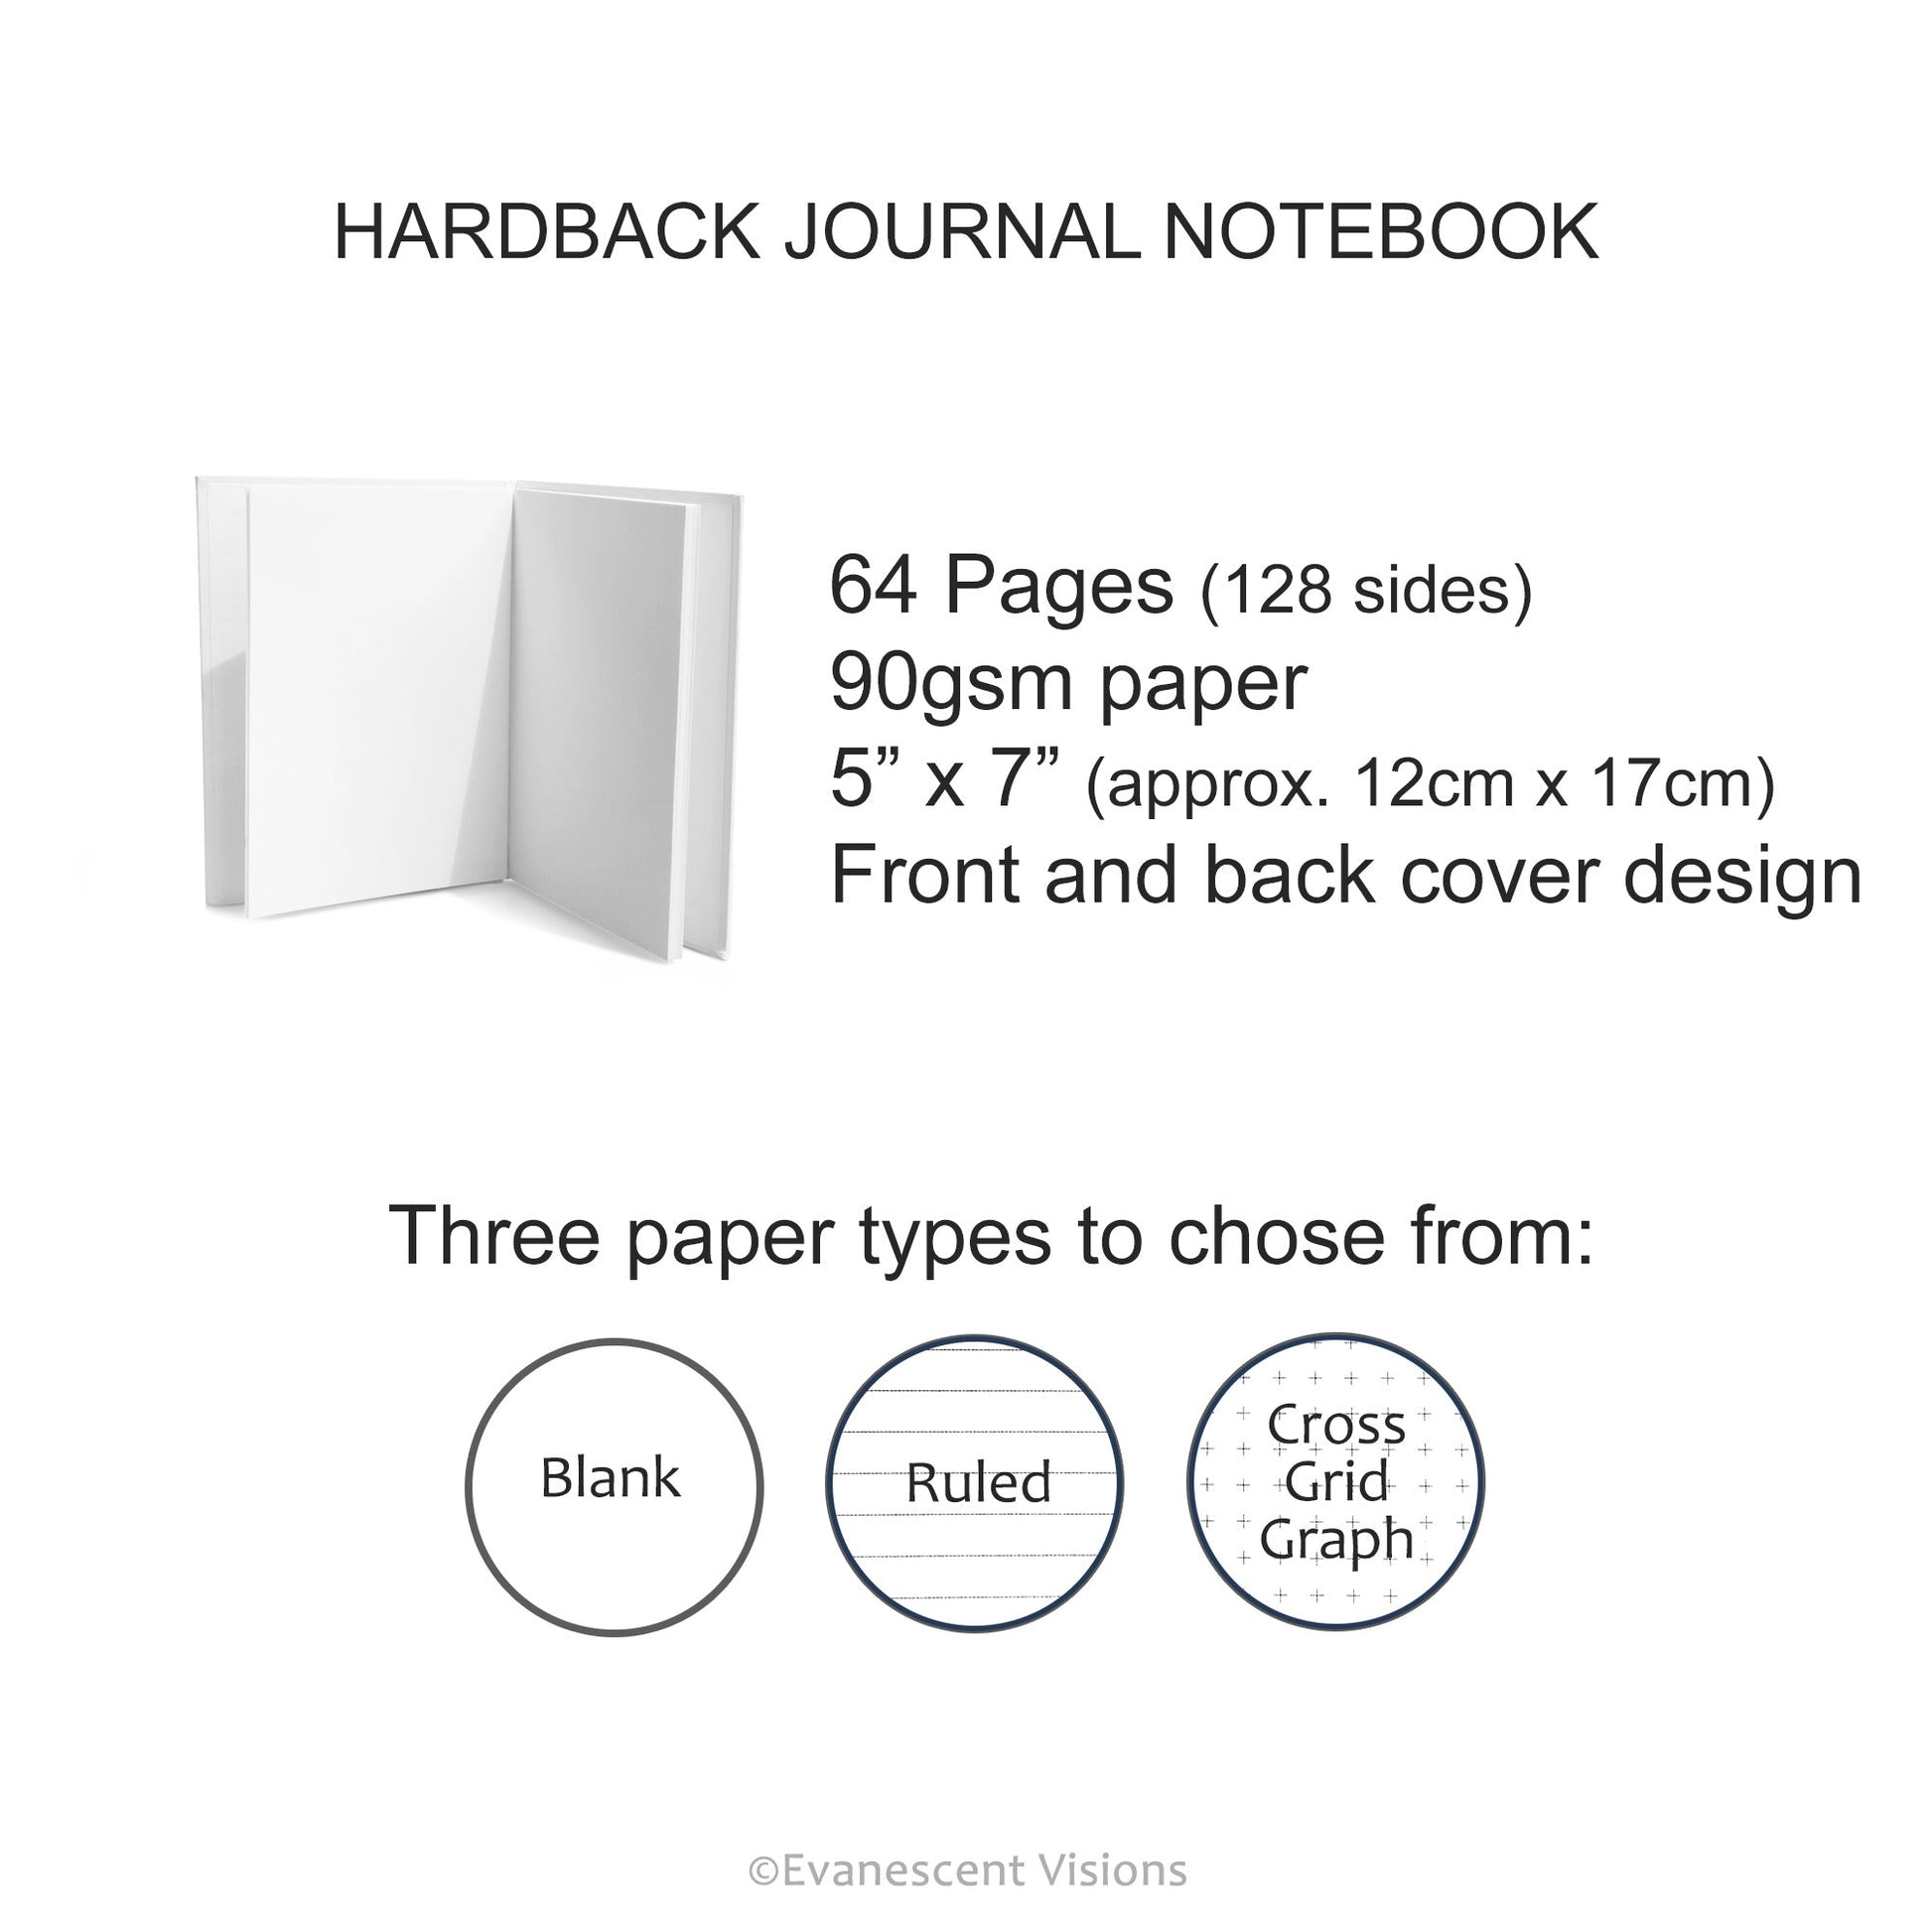 Hardcover notebook product details and paper options